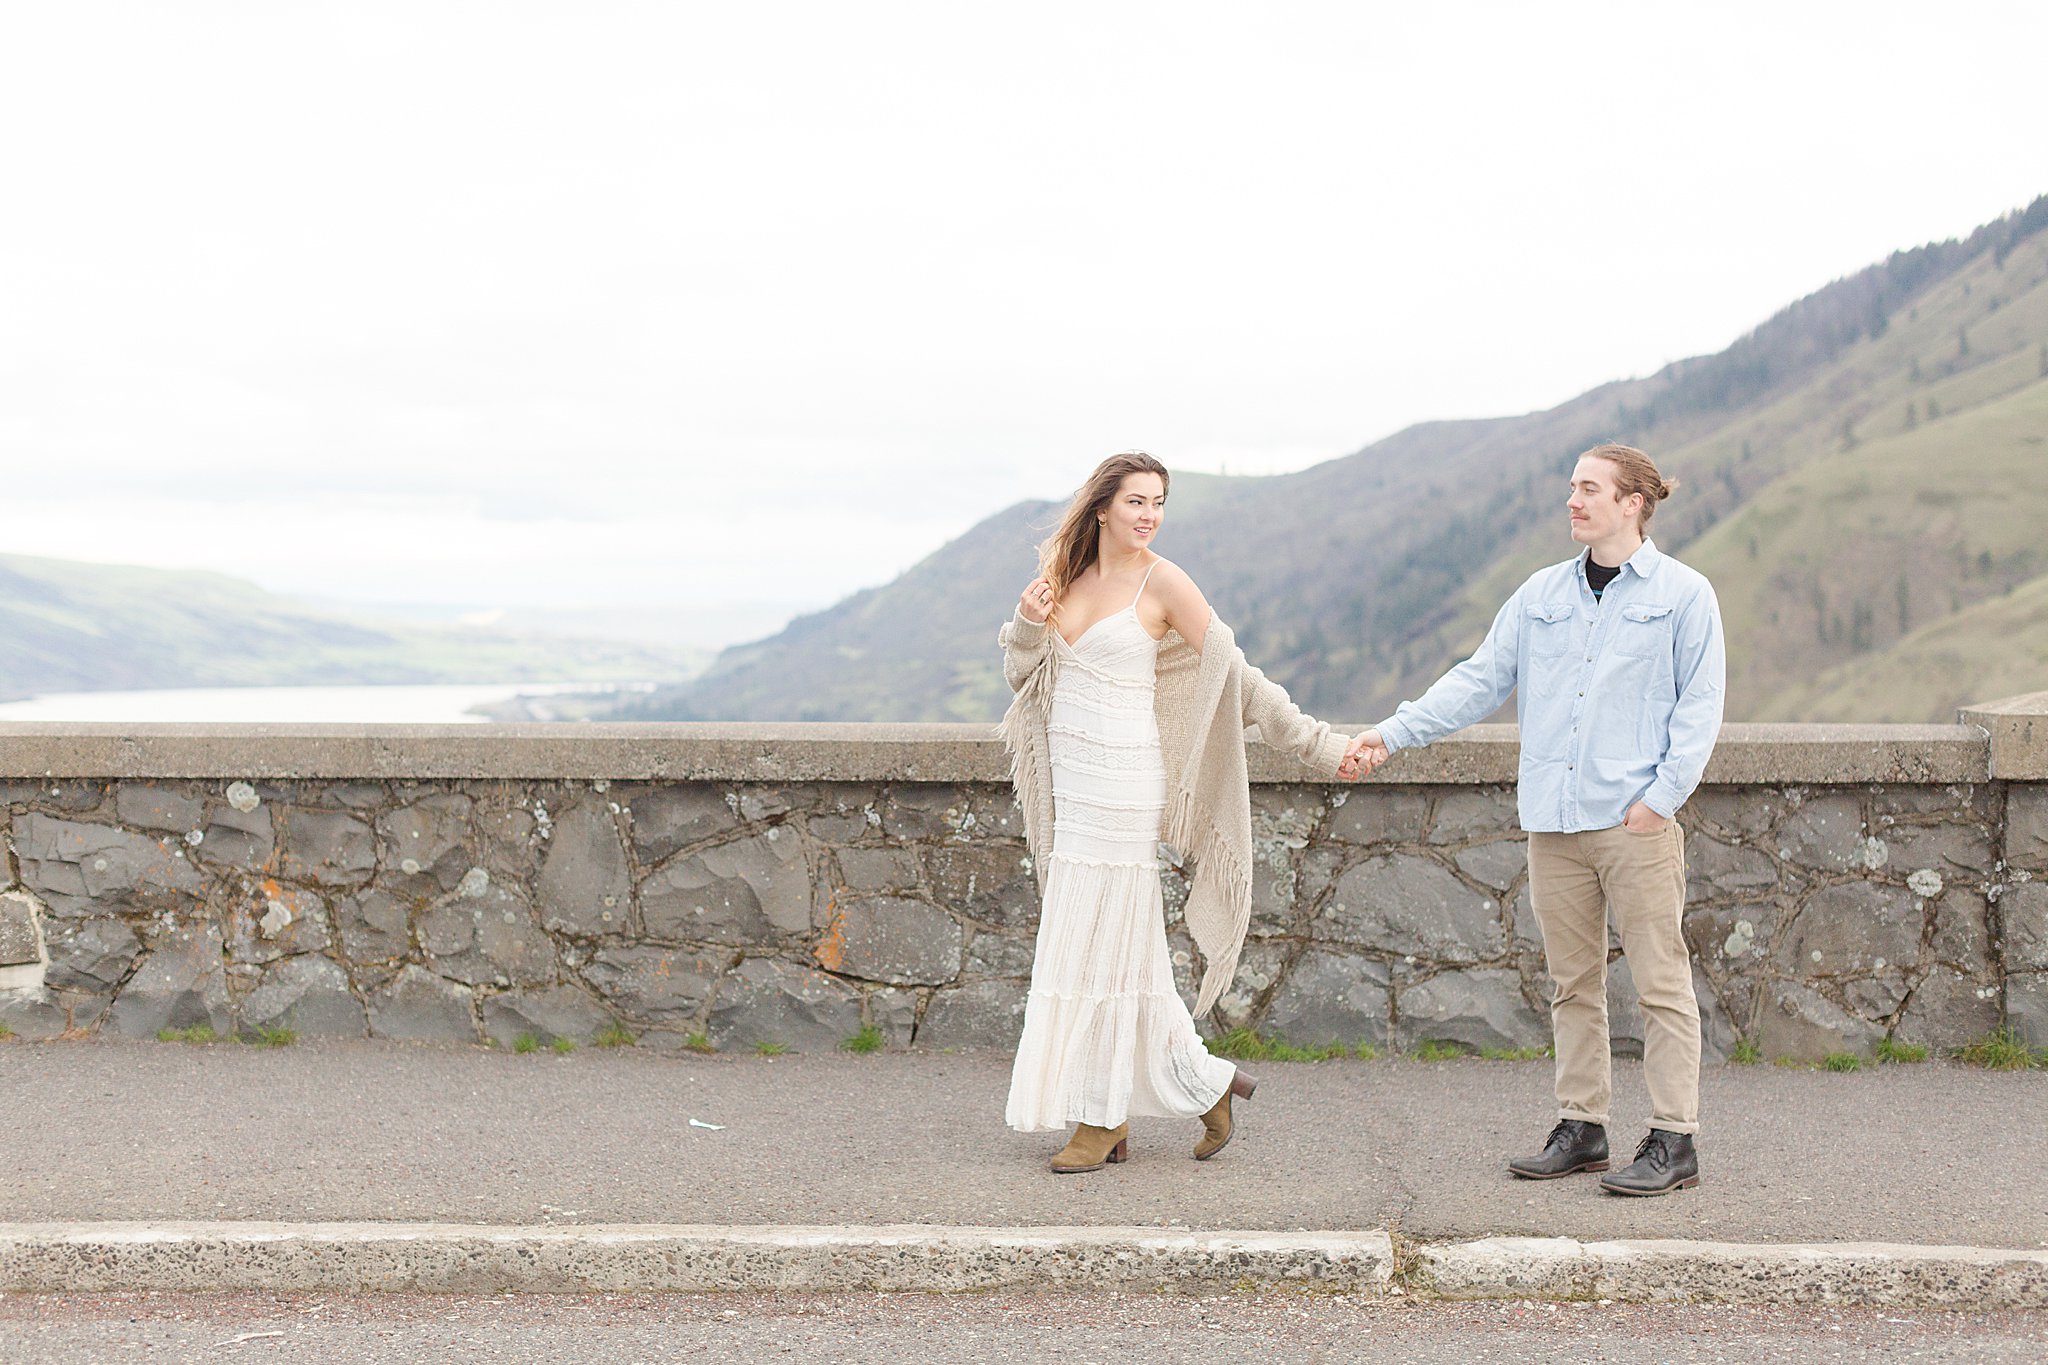 Sweetheart Pictures at Rowena Crest, Oregon